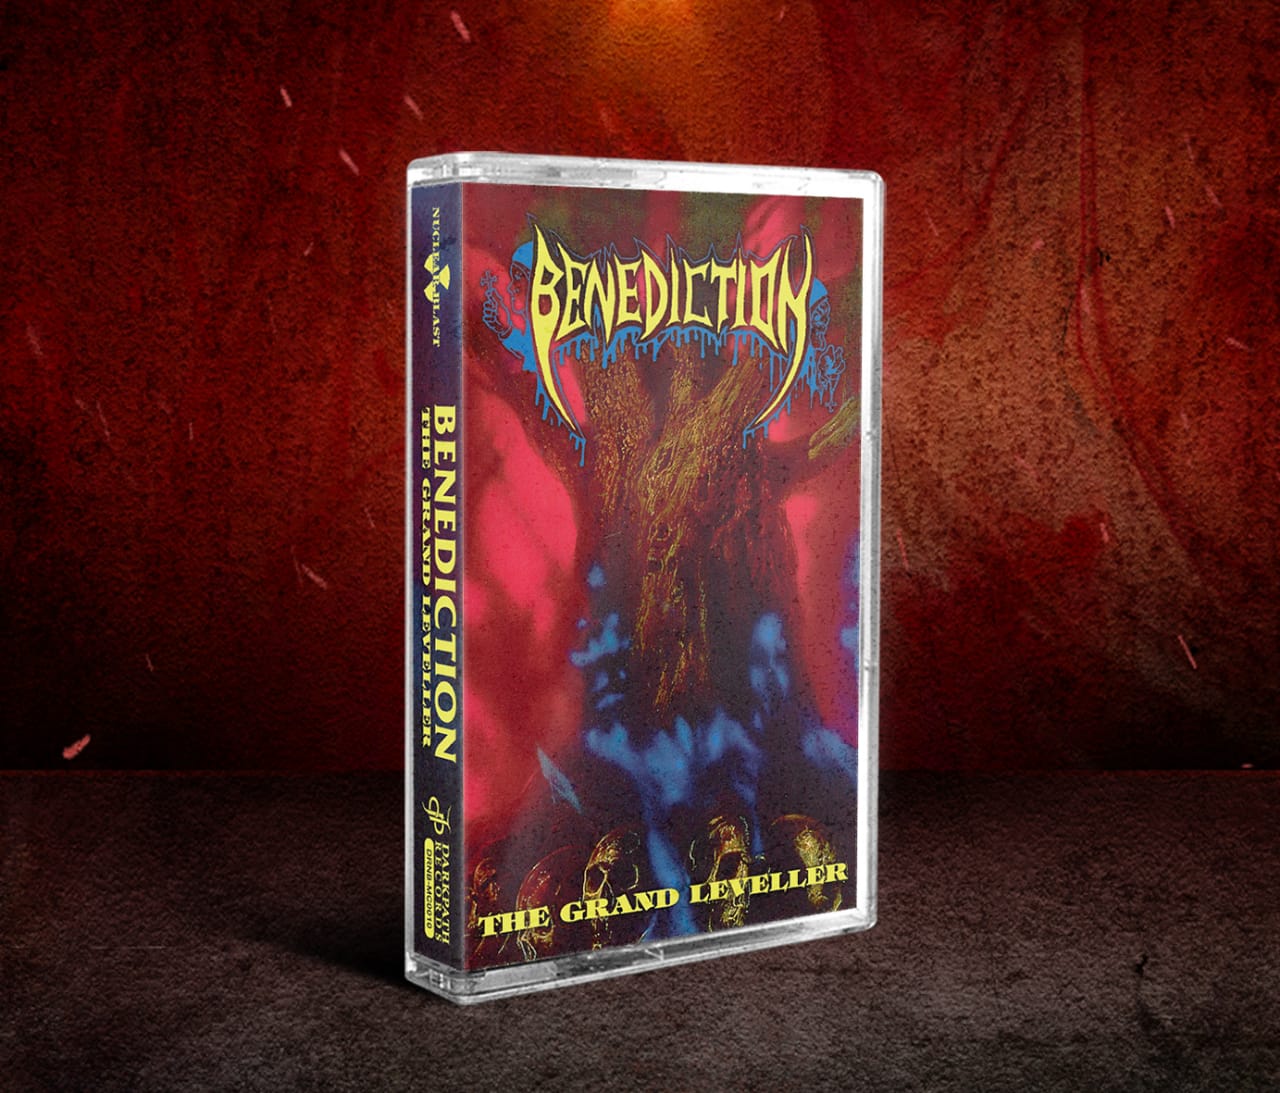 Image of BENEDICTION - SINISTER Tape